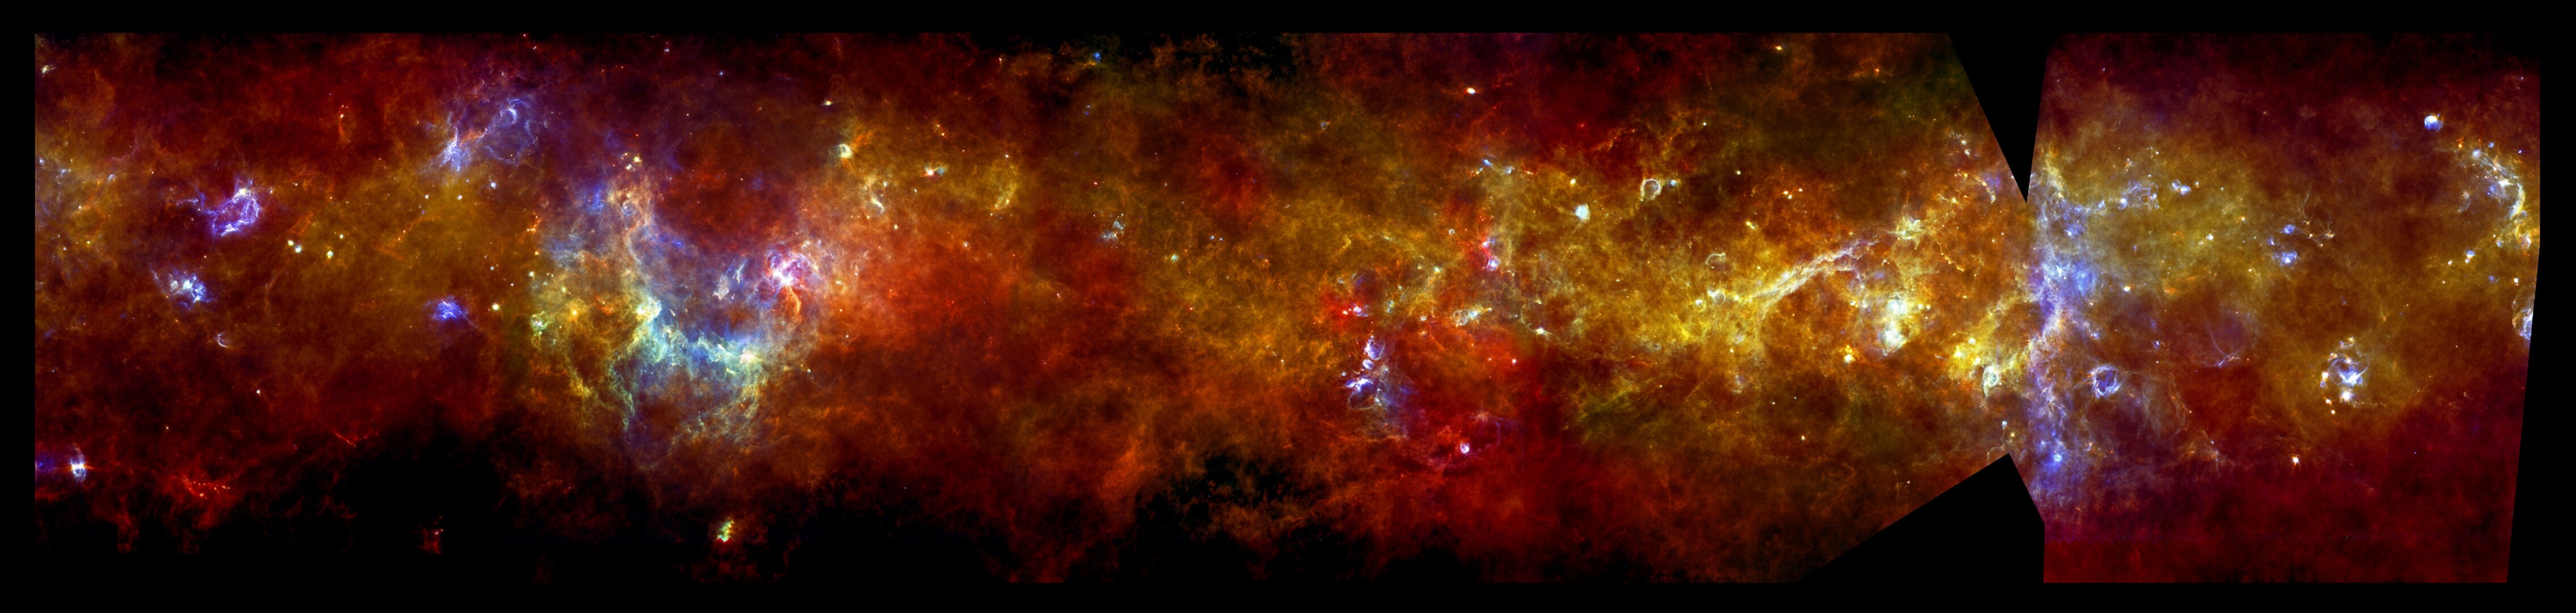 Glowing jewels in the Galactic Plane